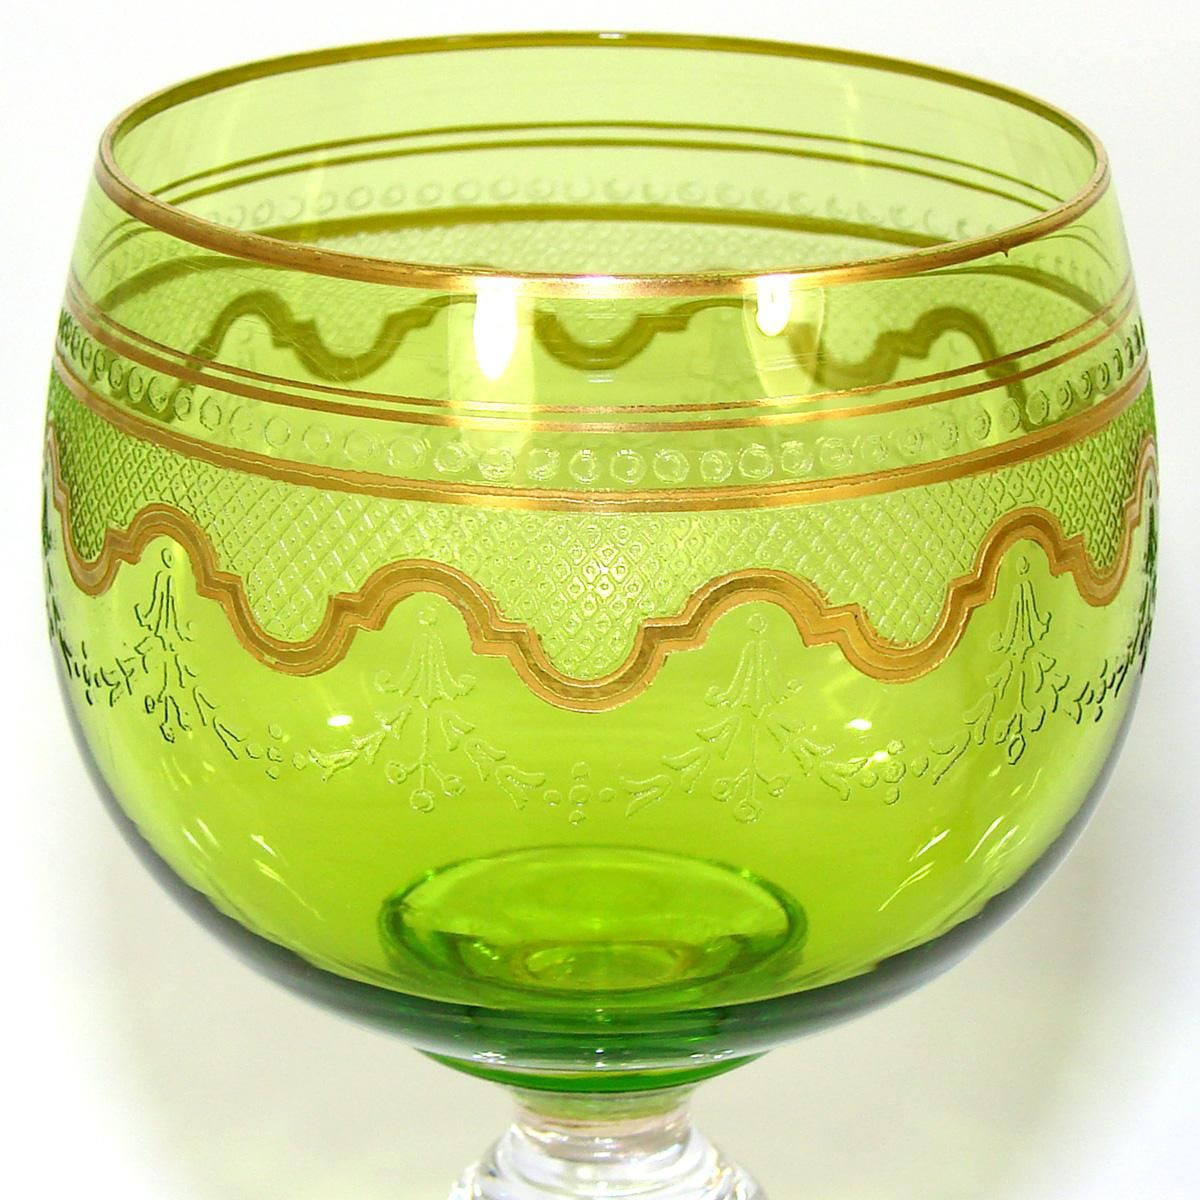 15 Fabulous St Louis Crystal Vase 2024 free download st louis crystal vase of elegant saint louis crystal chartreuse to clear gold enamel regarding elegant saint louis crystal chartreuse to clear gold enamel encrusted wine hock goblet found at